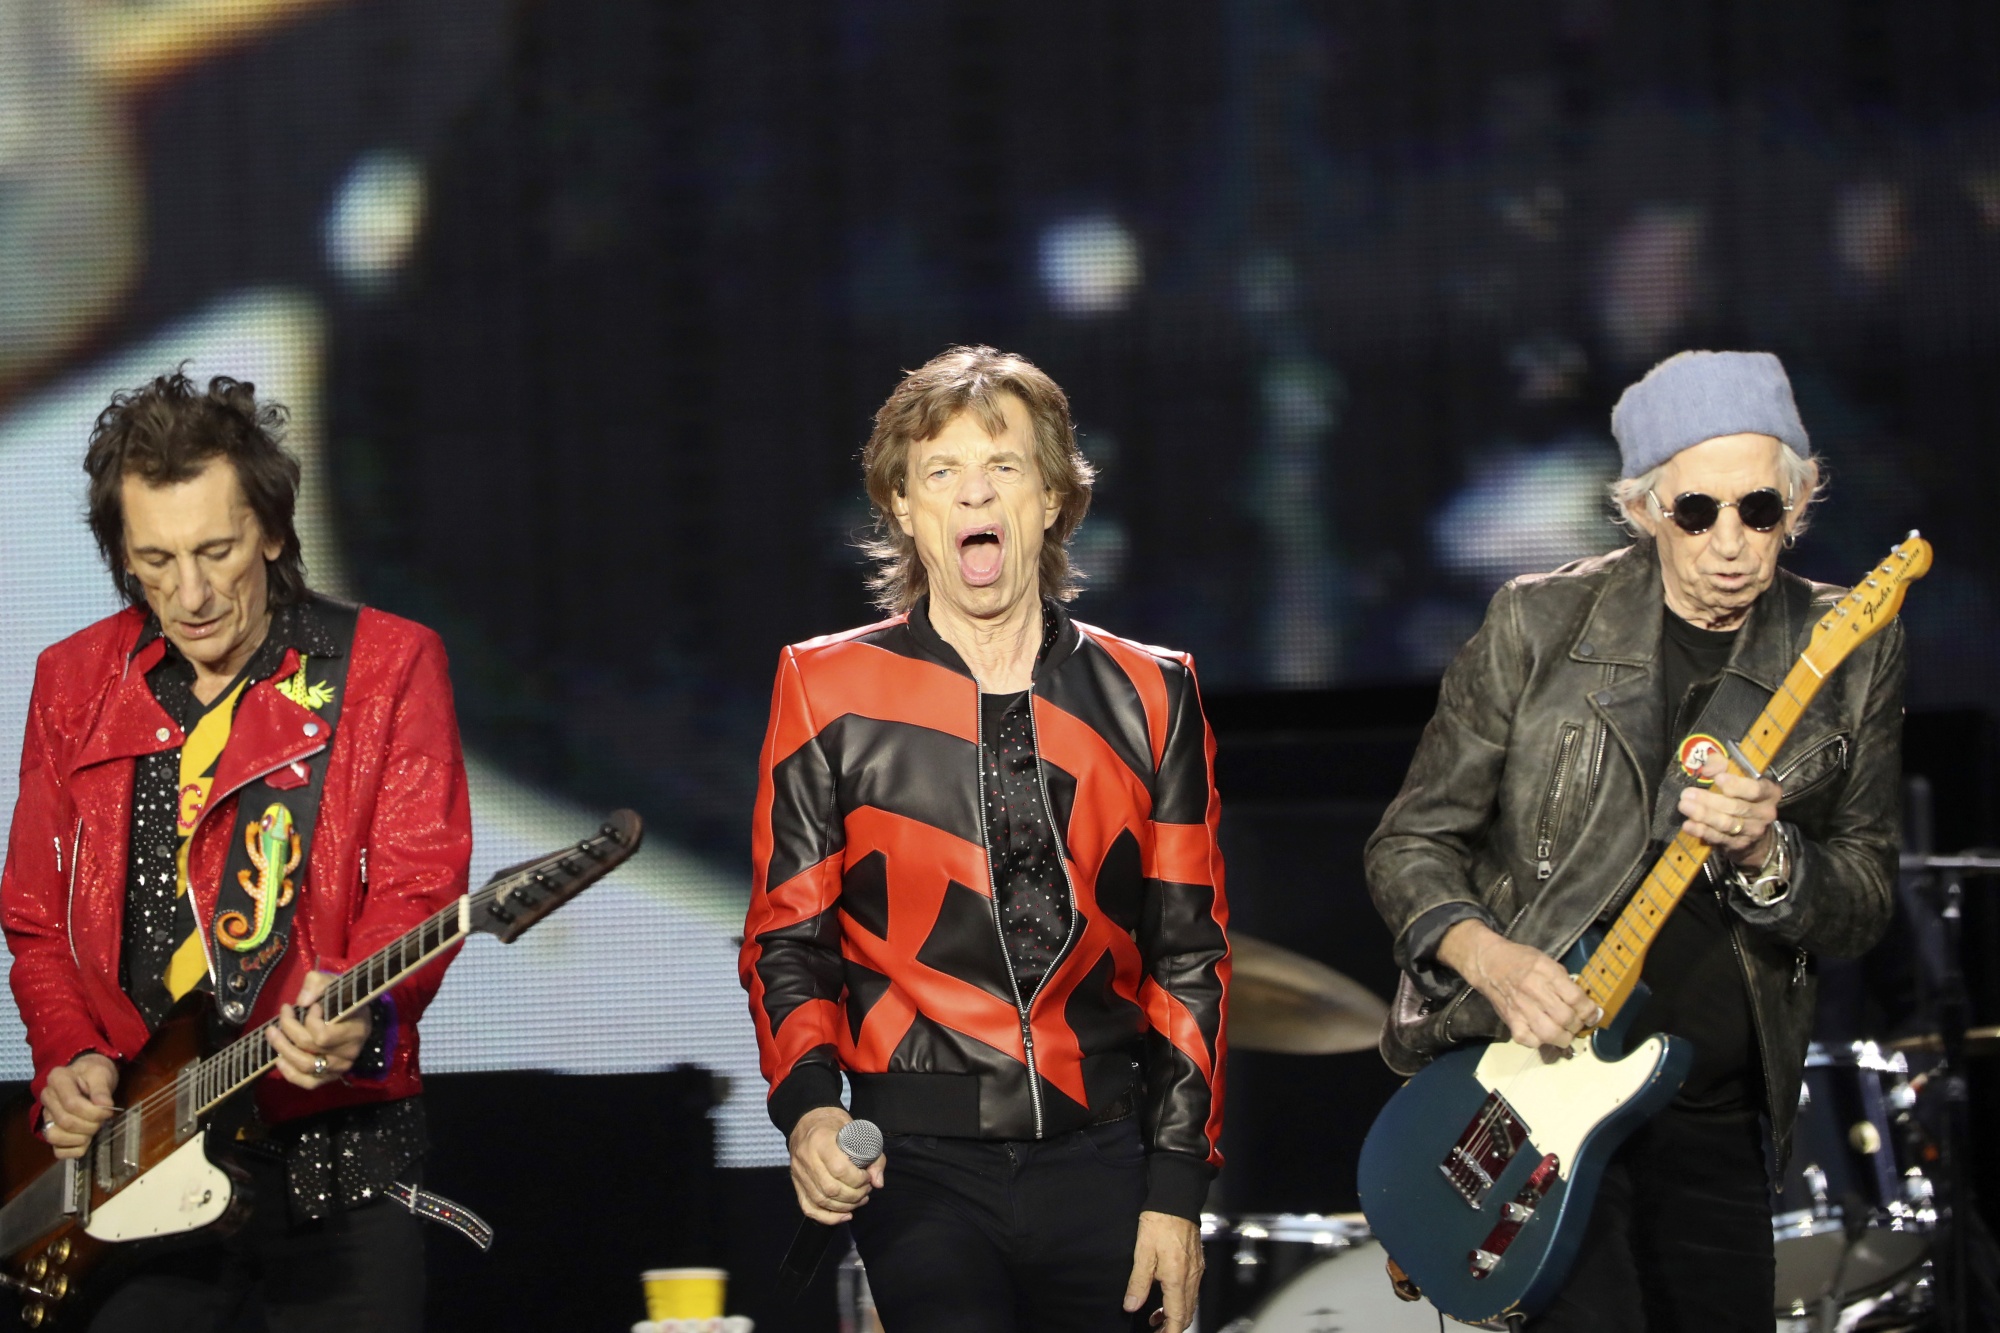 No Satisfaction: Jagger Has COVID, Rolling Stones Gig Off - Bloomberg